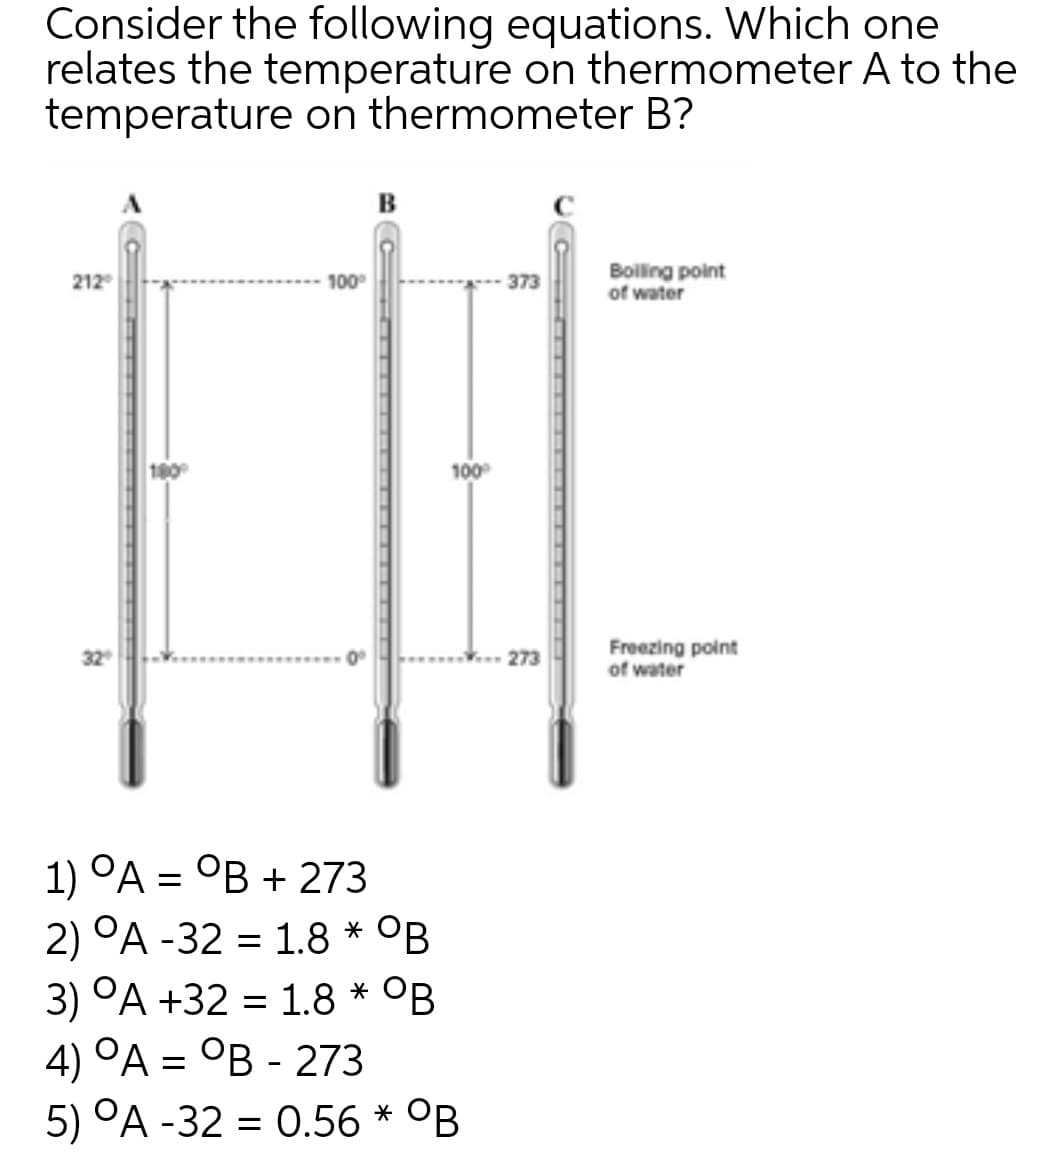 Consider the following equations. Which one
relates the temperature on thermometer A to the
temperature on thermometer B?
в
Boiling point
of water
212
100
373
100
Freezing point
of water
273
1) ОА — ОВ + 273
2) °A -32 = 1.8 * OB
3) °A +32 = 1.8 * °B
4) °A = °B - 273
5) °A -32 = 0.56 * °B
